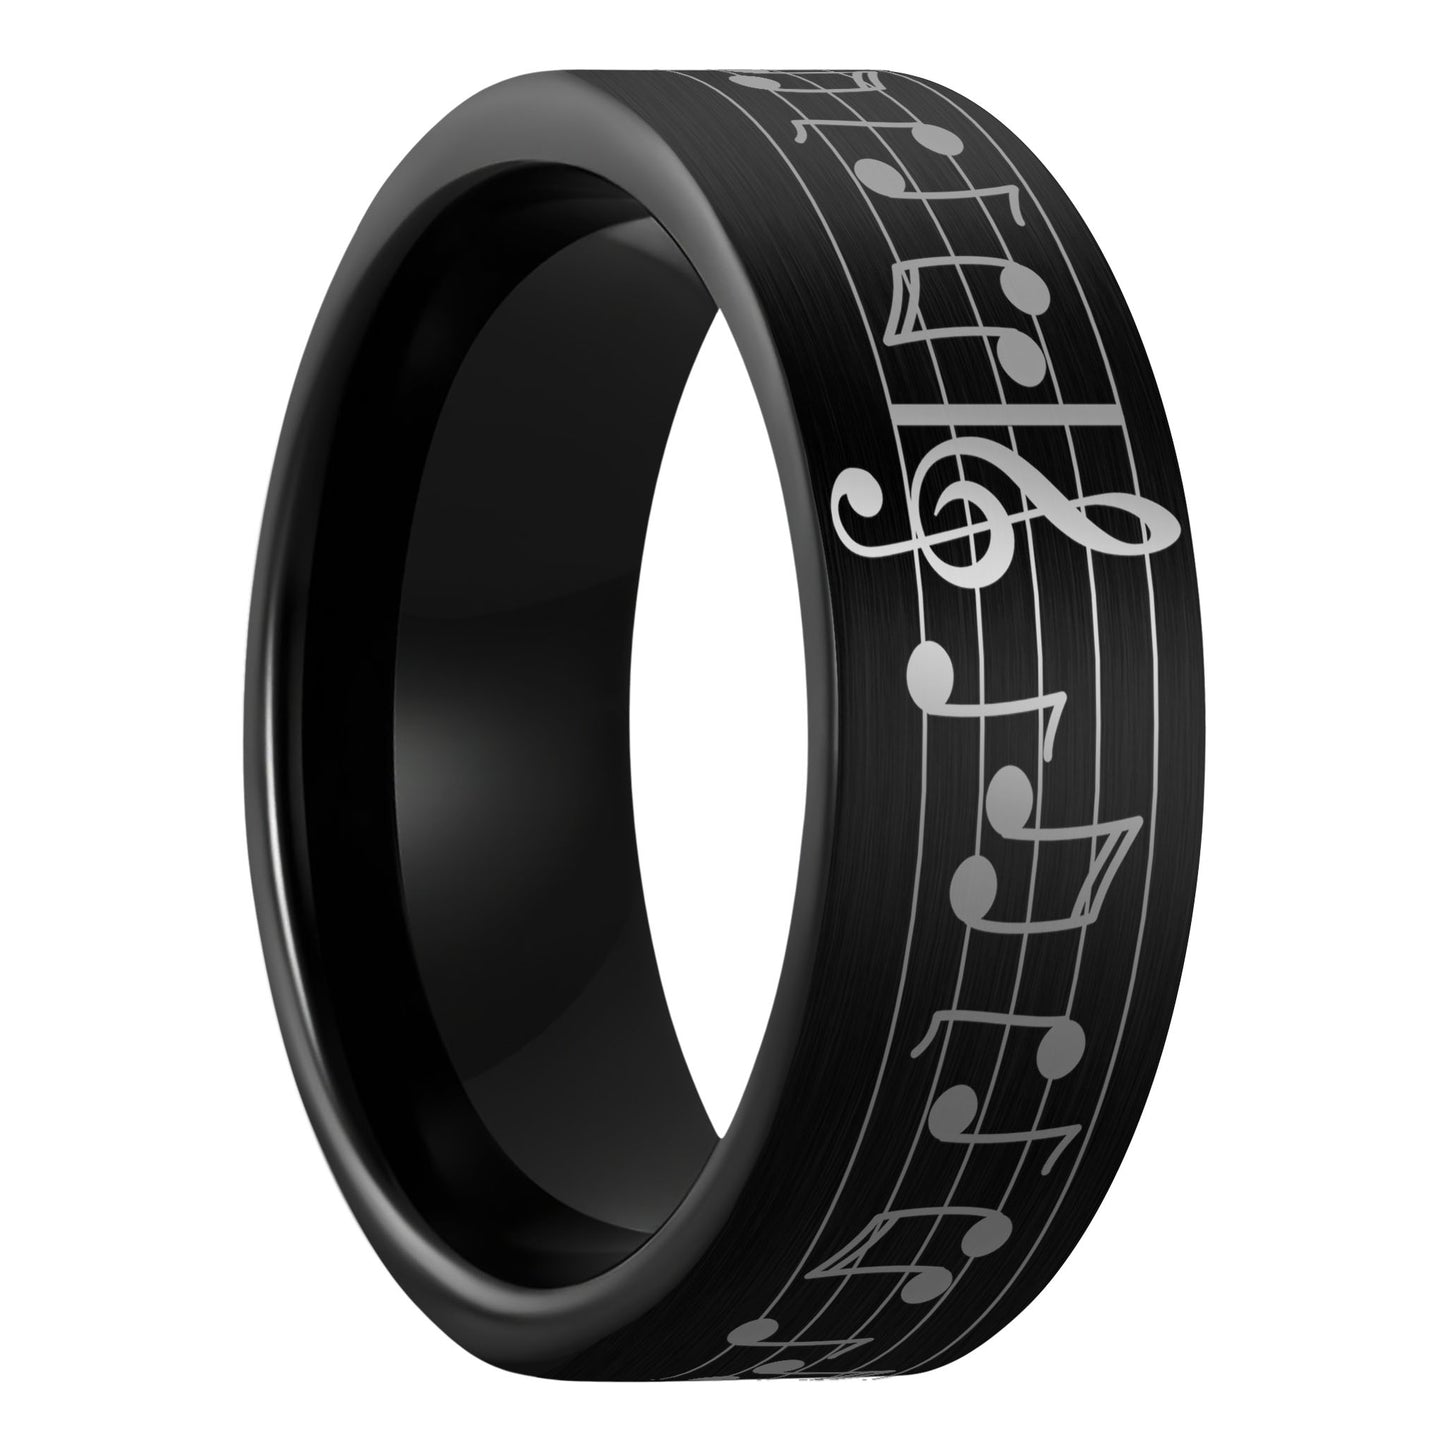 A music notes brushed black tungsten men's wedding band displayed on a plain white background.